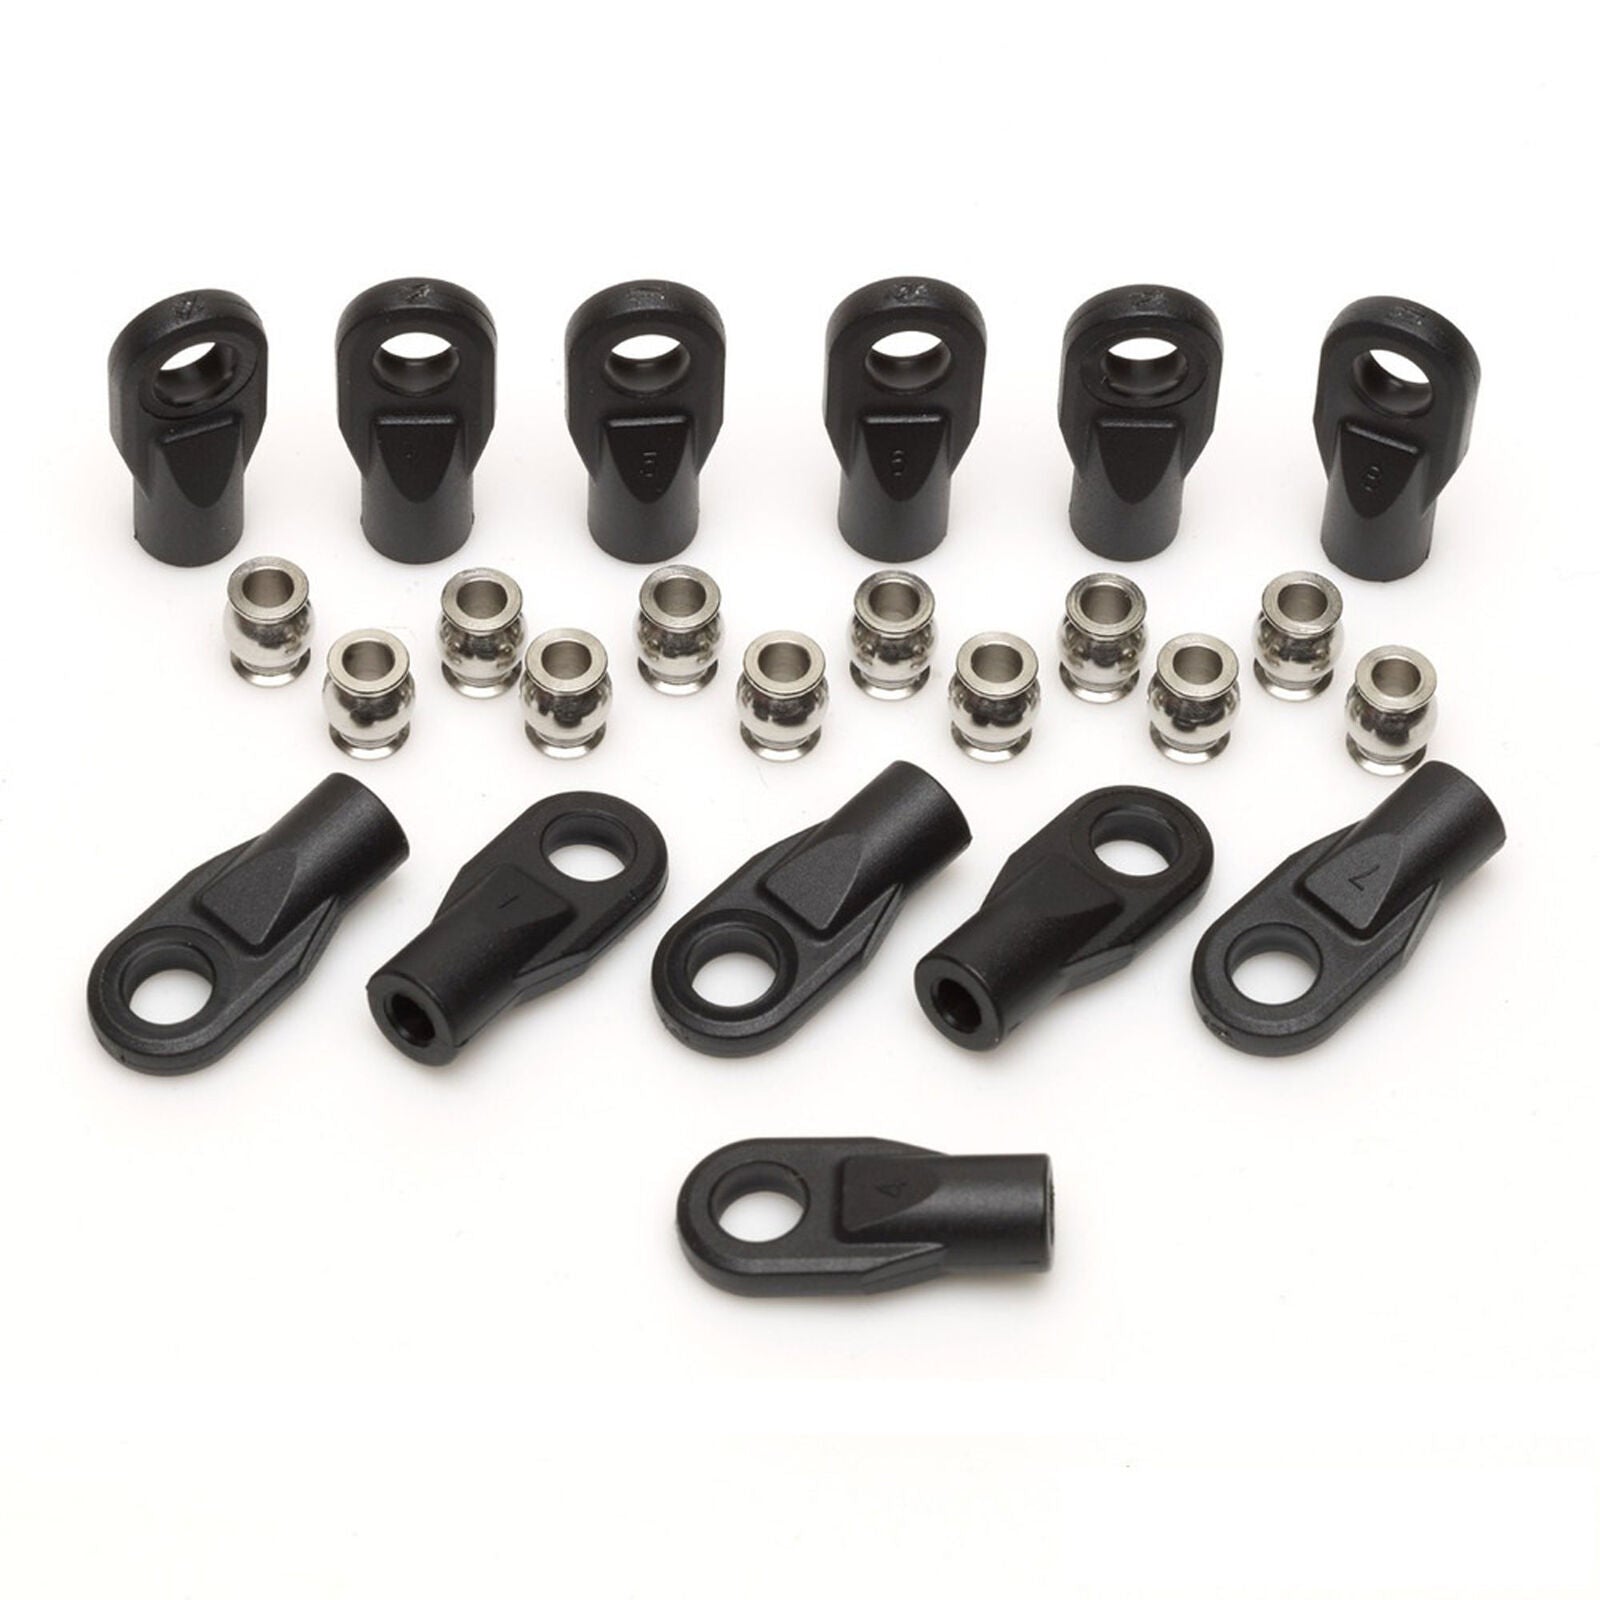 INCISION IRC00010 Rod Ends with Pivot Balls (12)